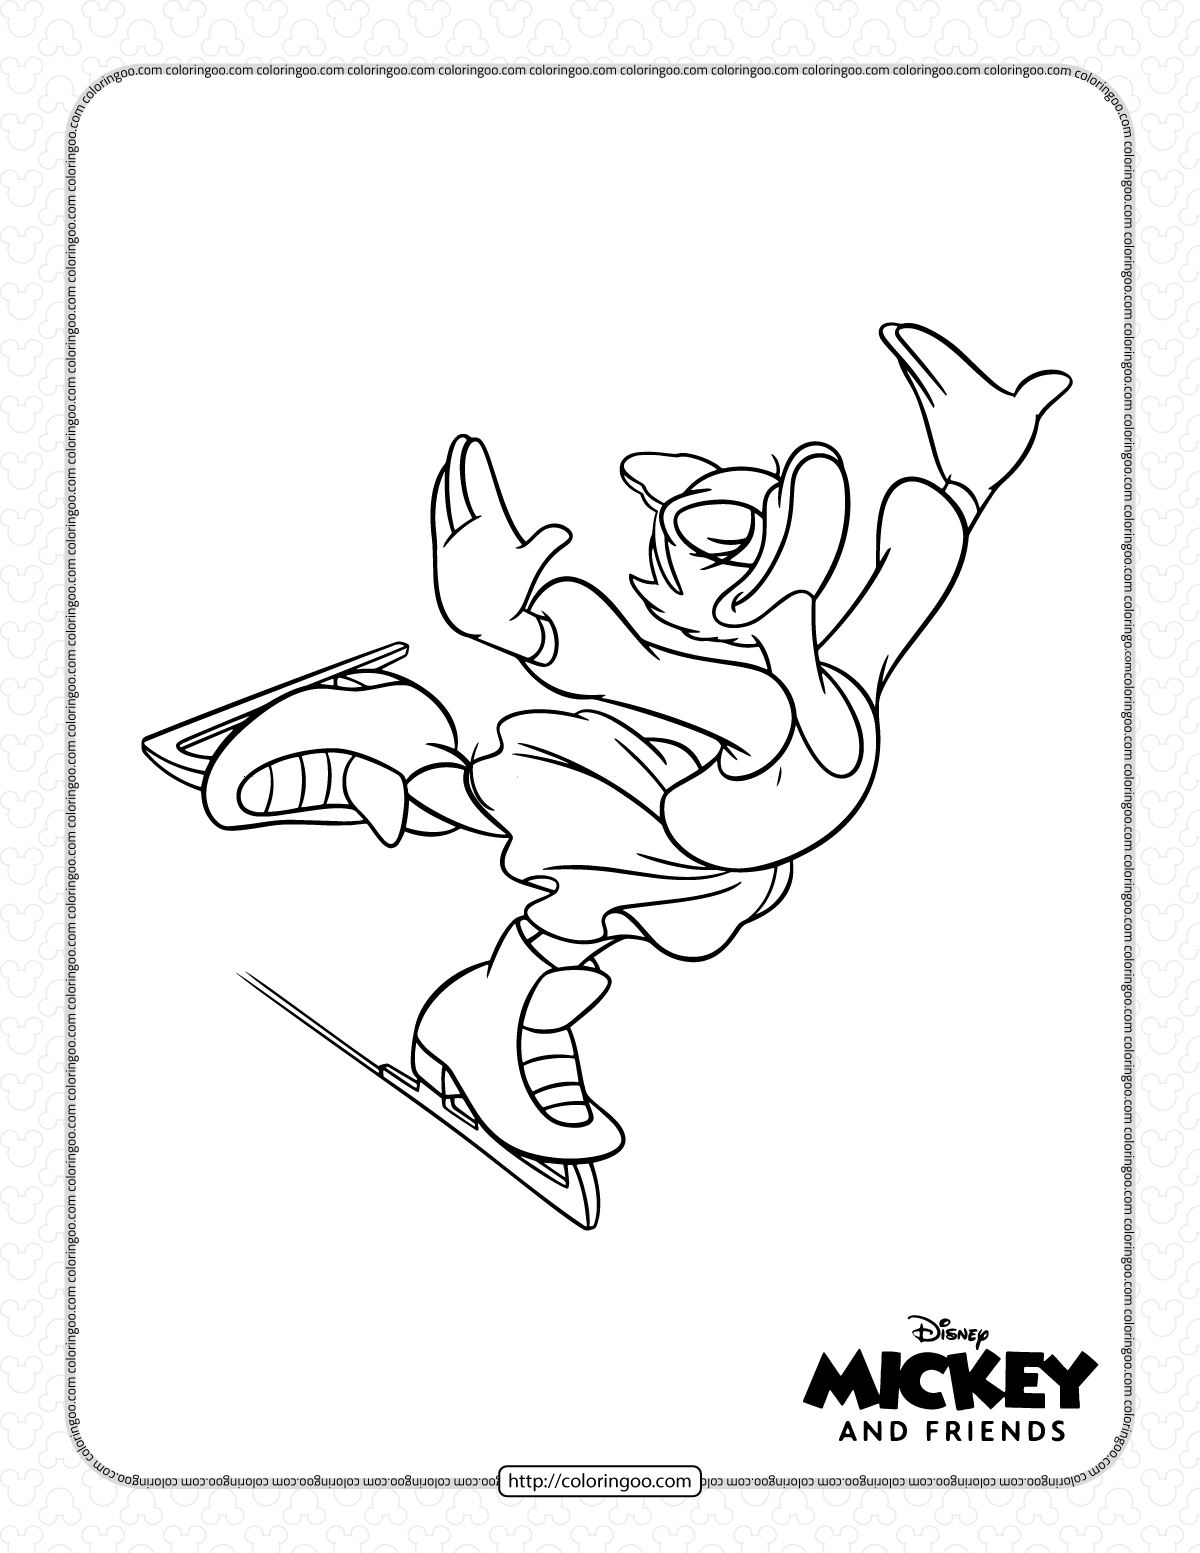 disney daisy duck ice skating coloring pages